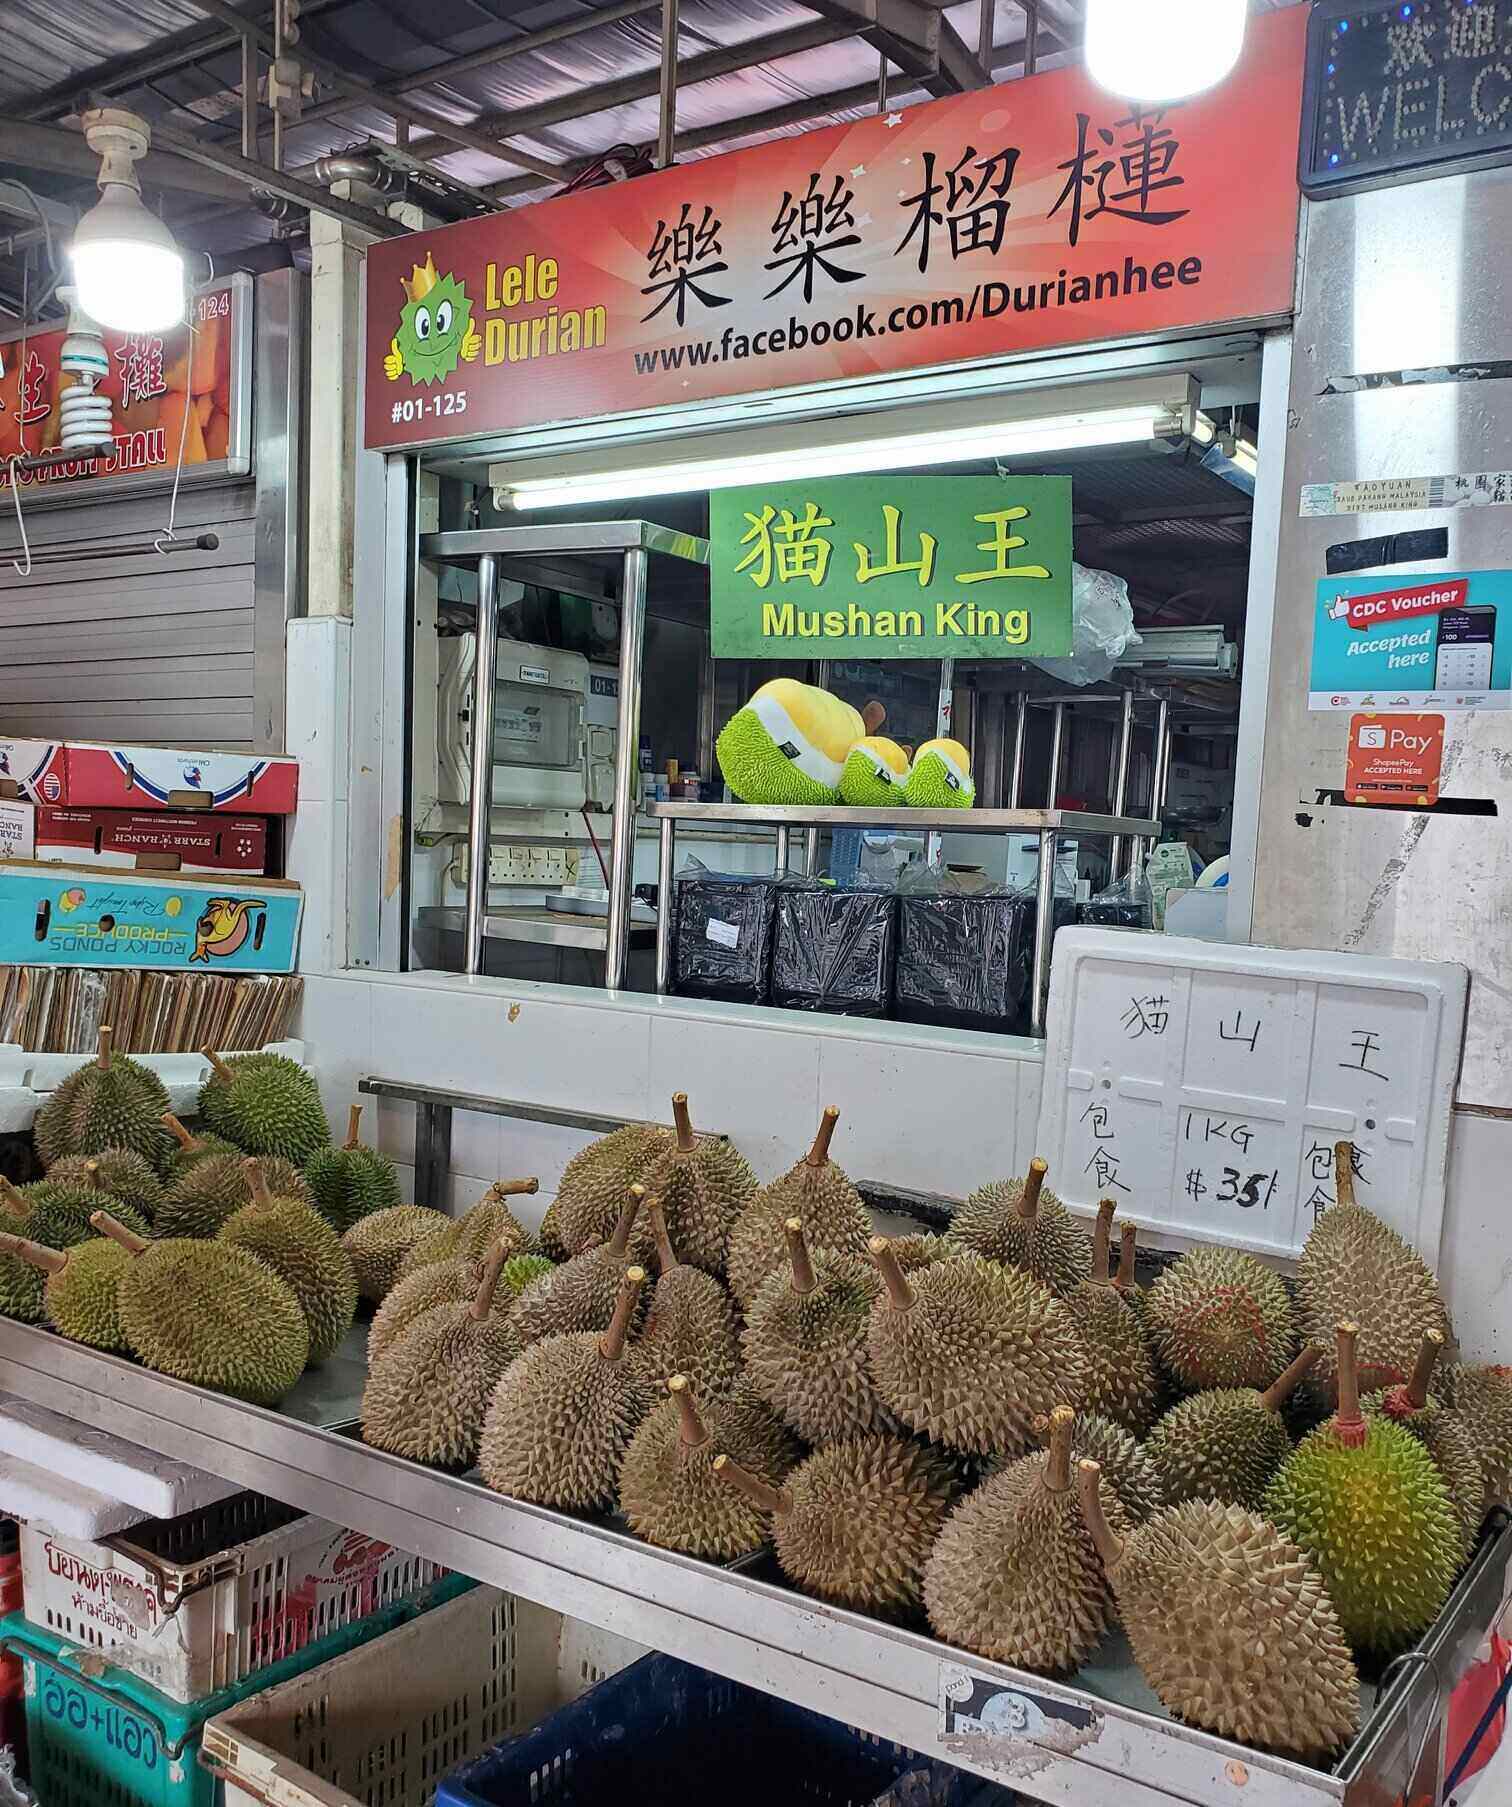 lele-durian-stall-storefront